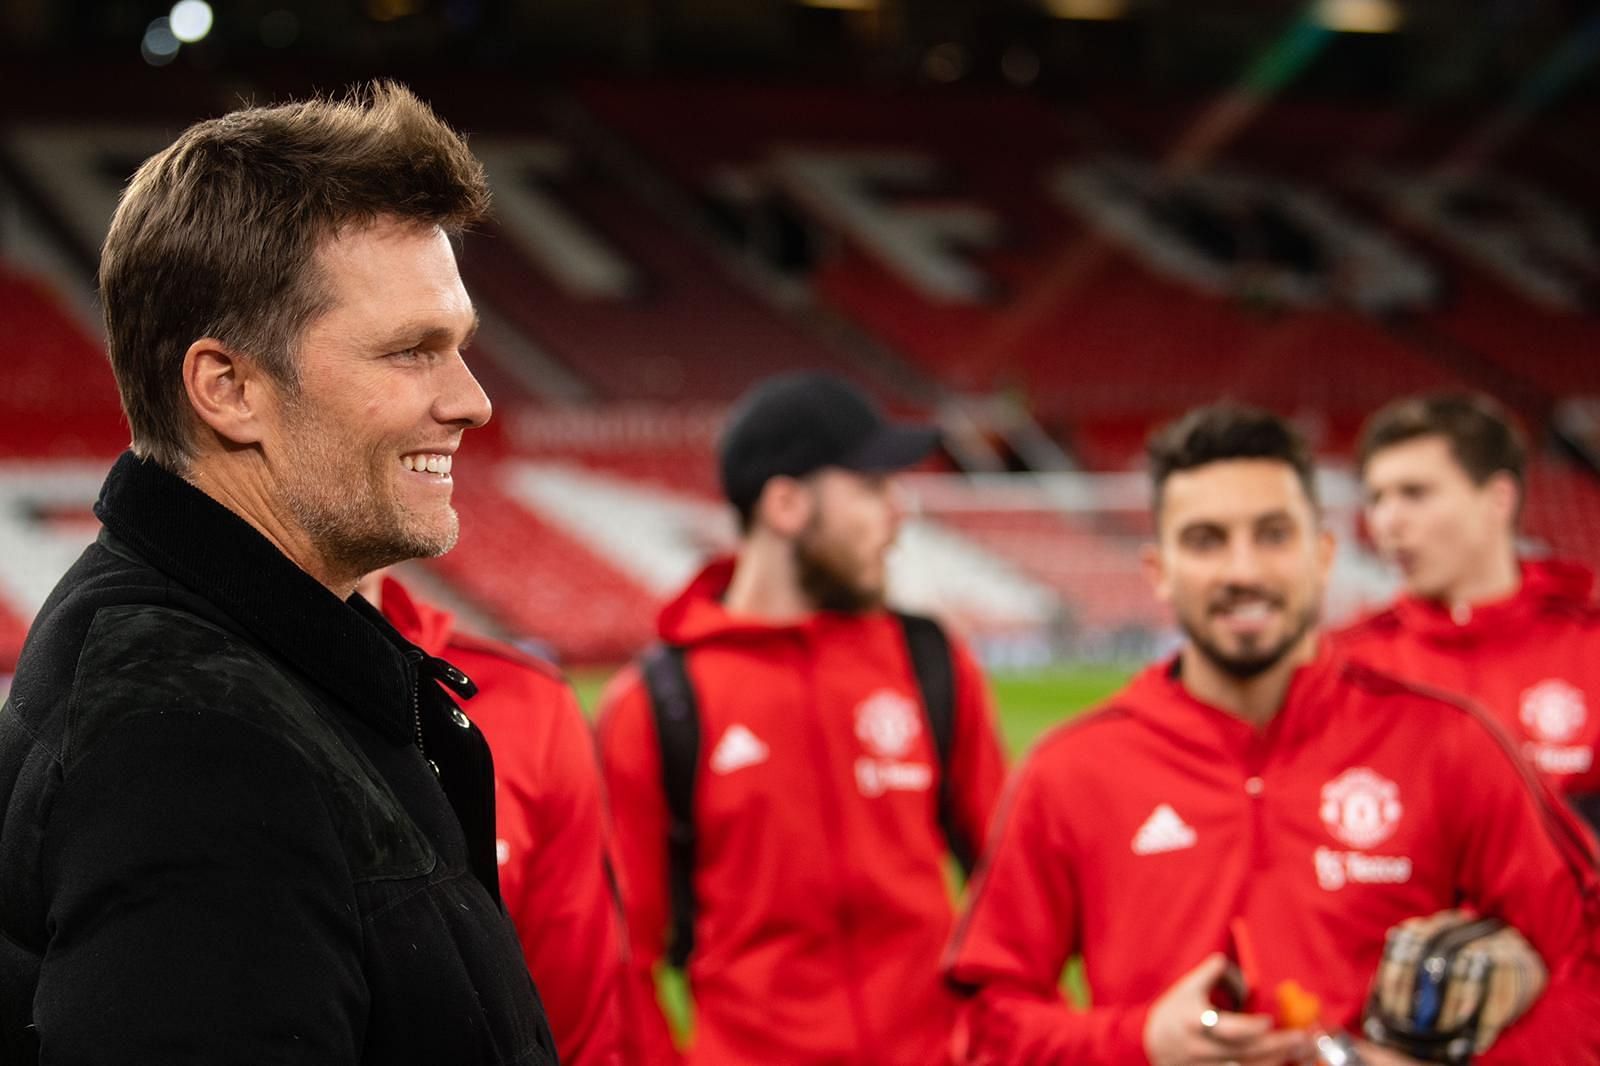 Tom Brady meets Manchester United player | Image Credit: Manchester United/Twitter